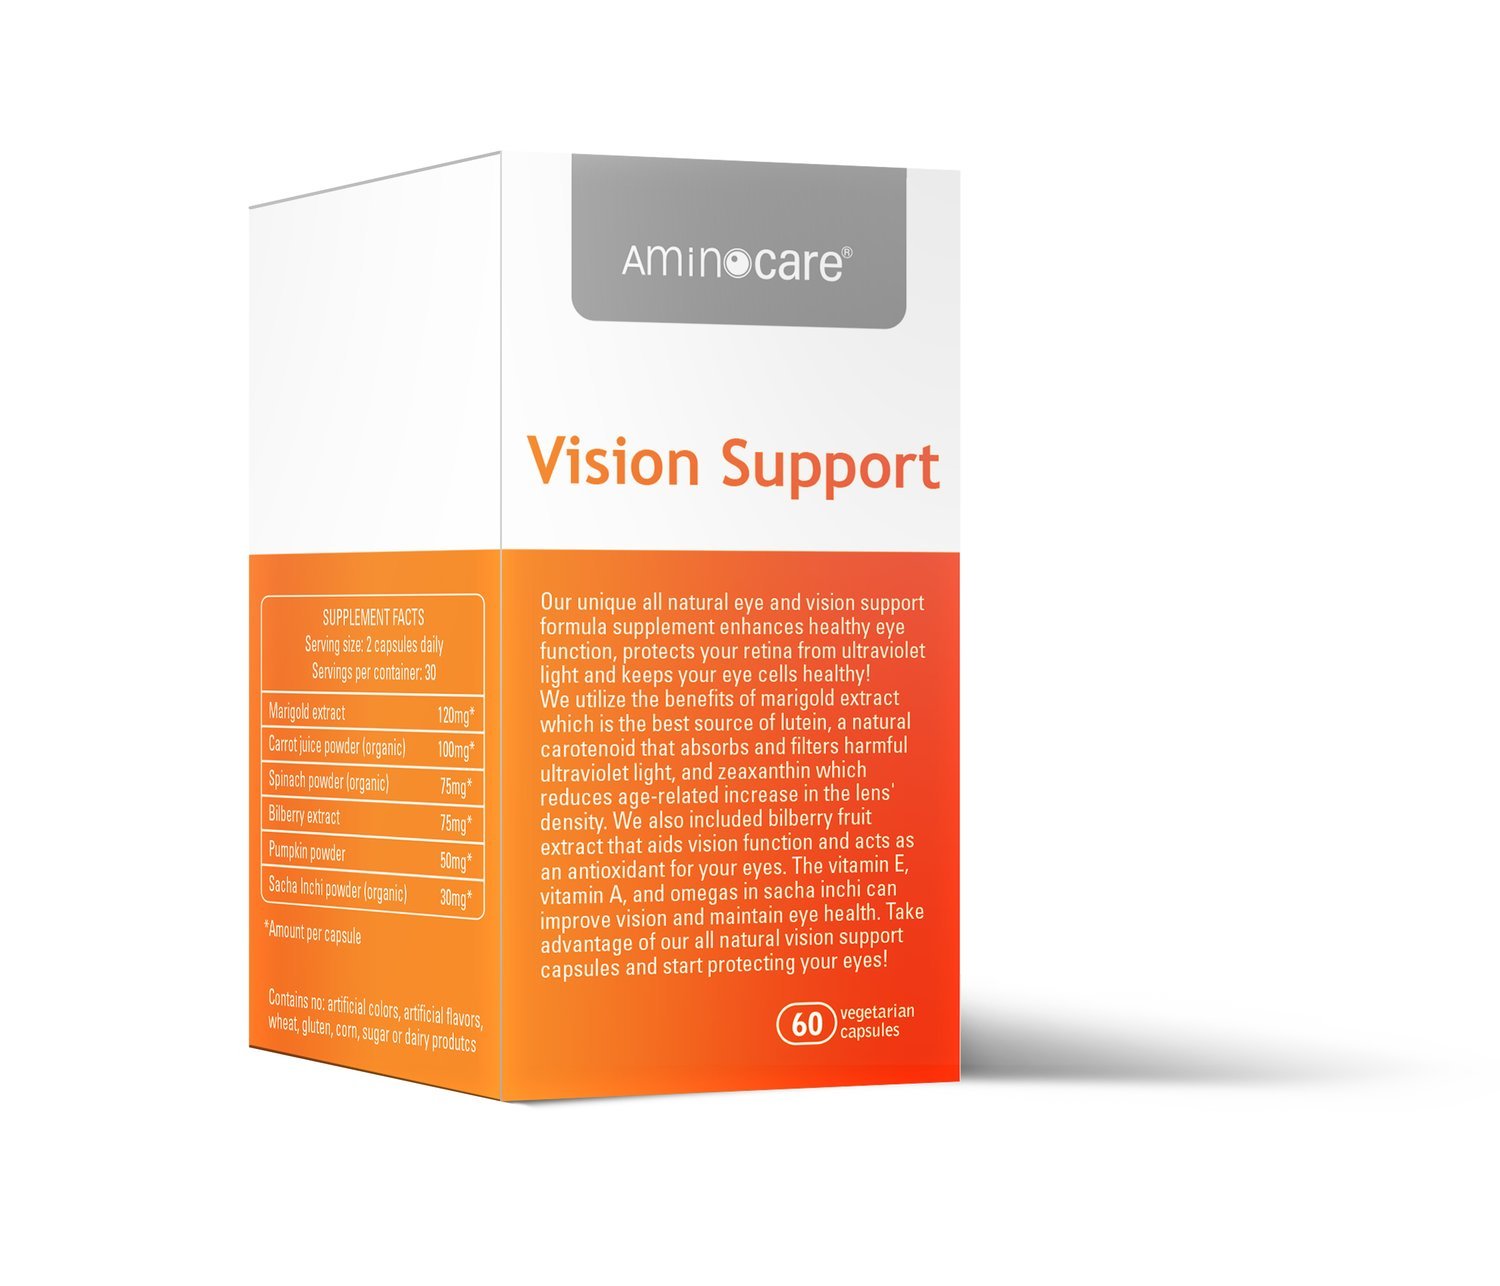 AMINOCARE ® VISION SUPPORT